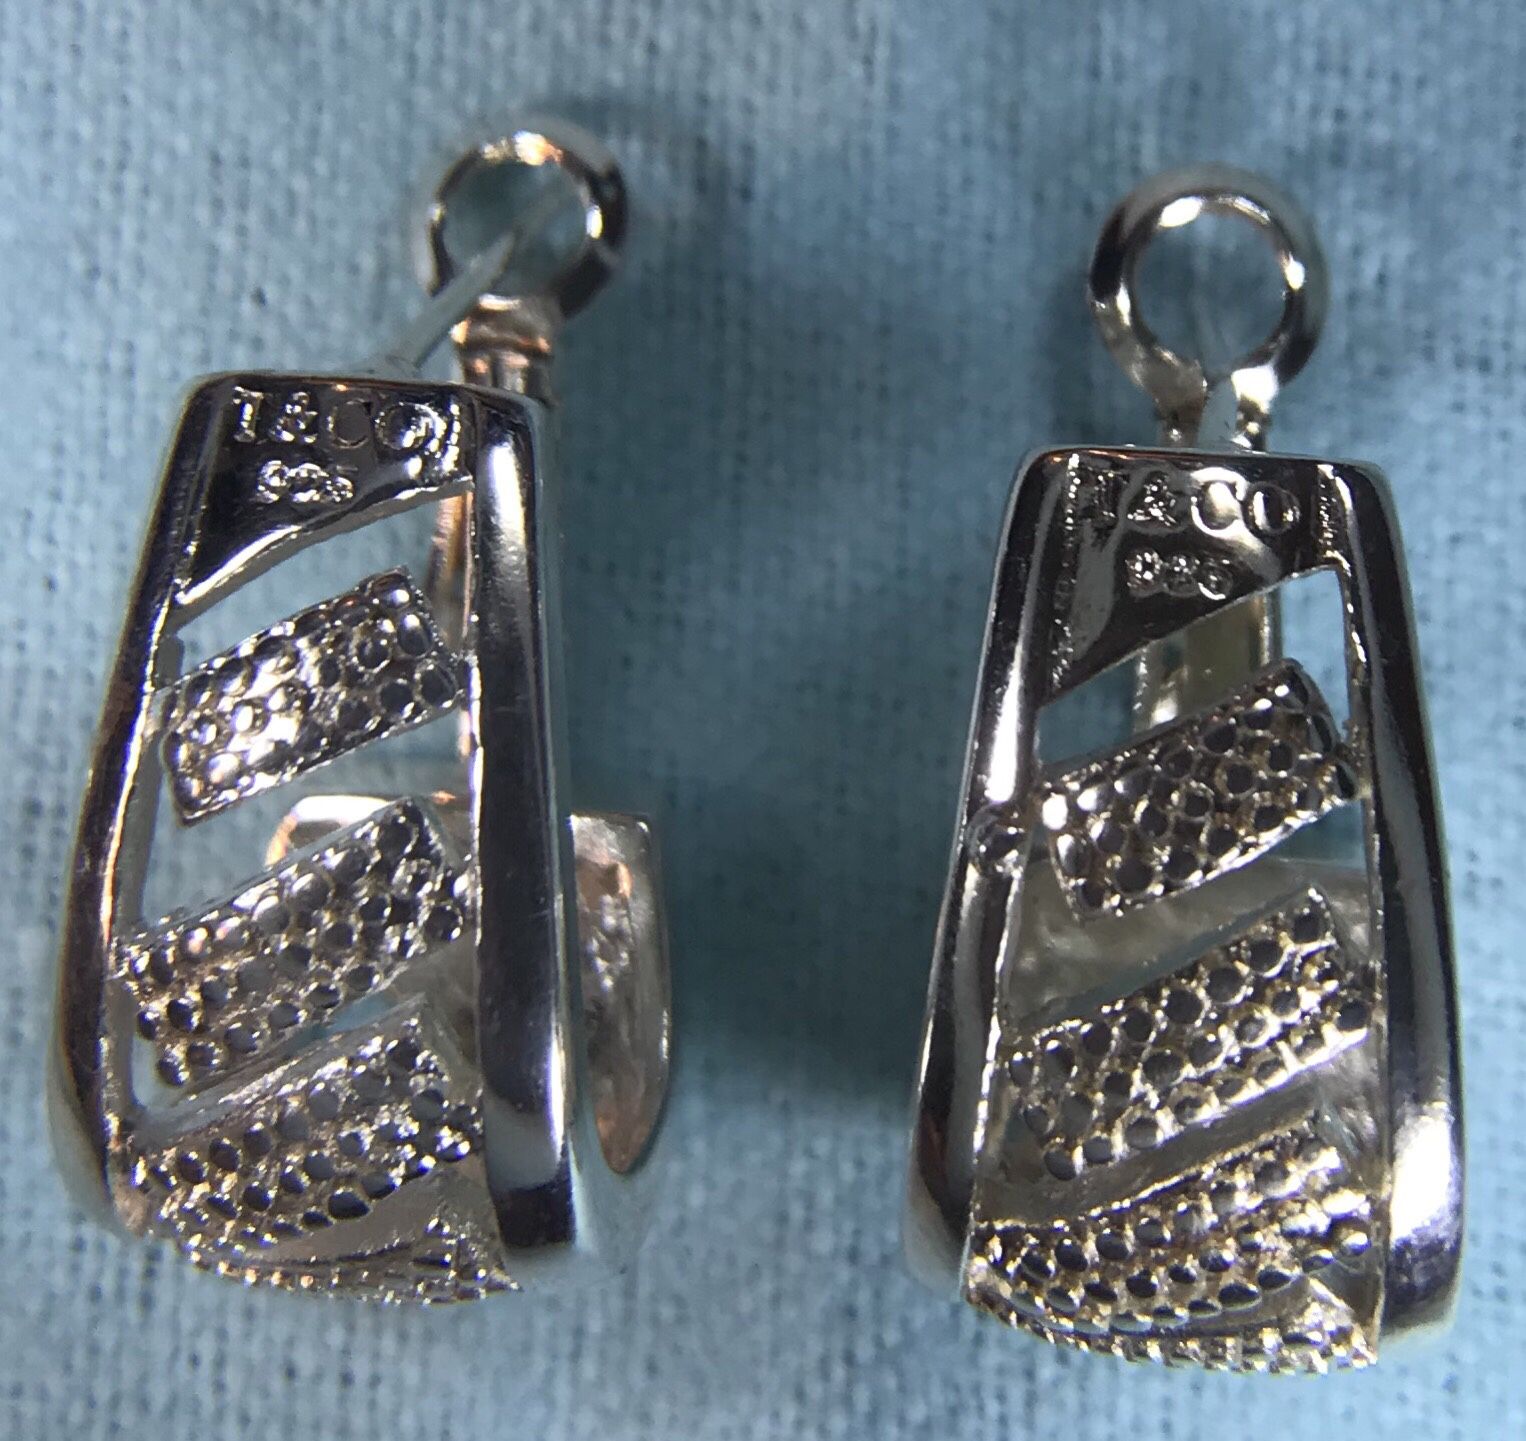 Authentic Tiffany & Co. sterling silver earrings, vintage